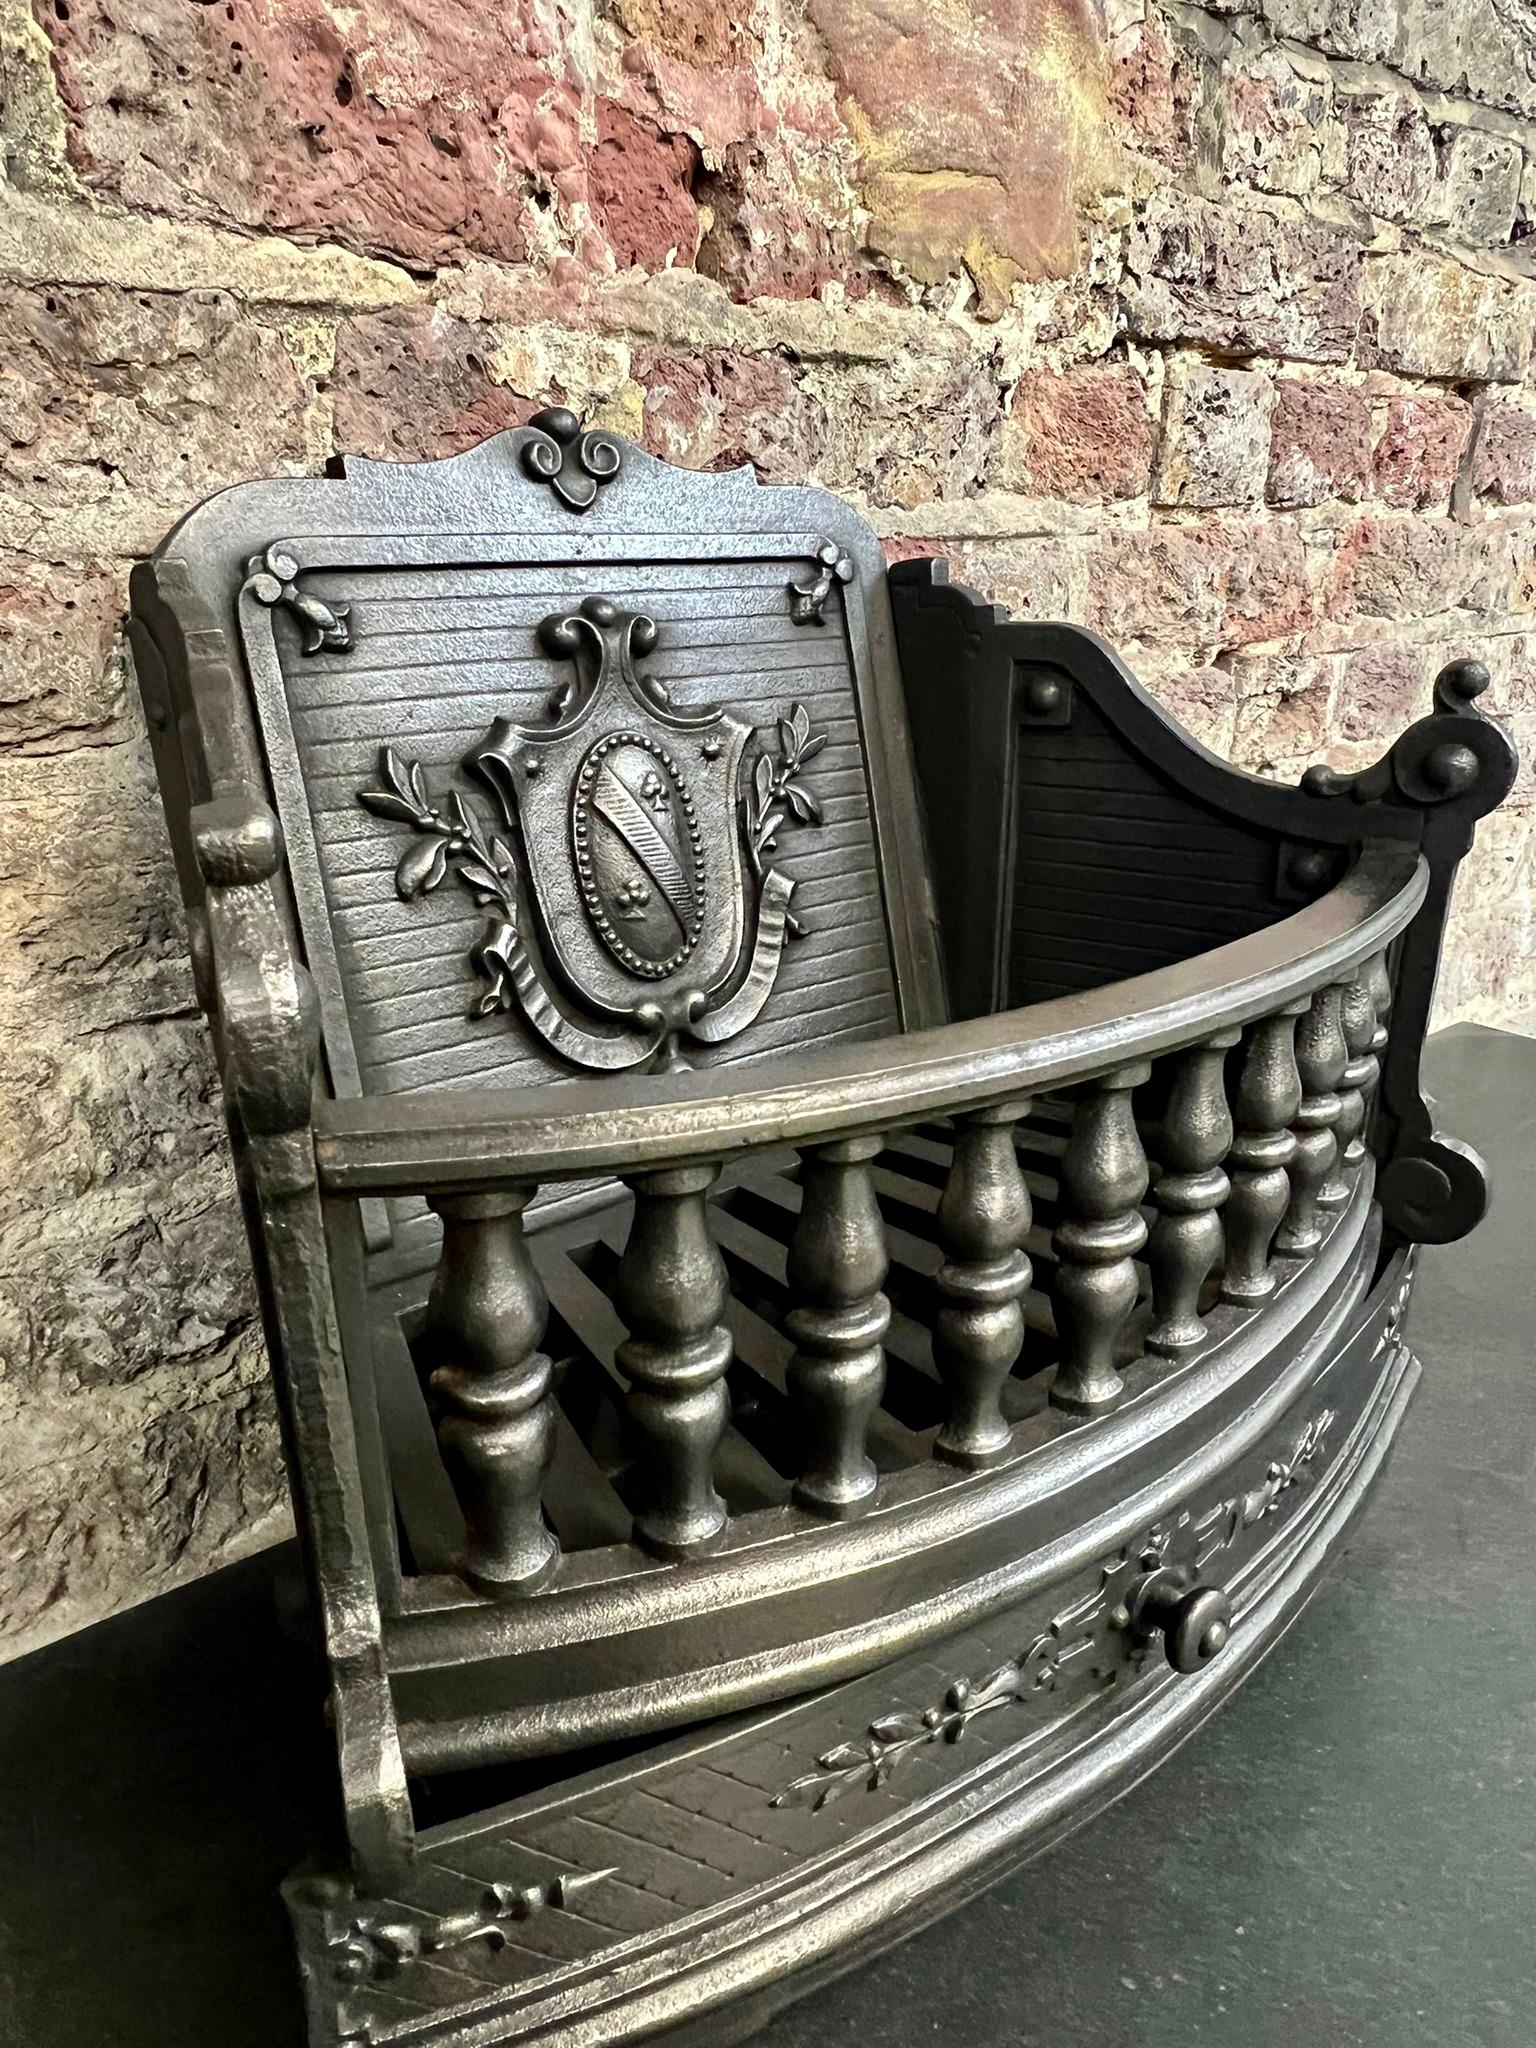 19th Century Victorian cast iron fireplace grate.
A Fine example of an English bow fronted fireplace basket. 
Complete with original shield crested fire back, fire grate, ash pan, ash cover, detailed front bars supported by balusters.
Recently